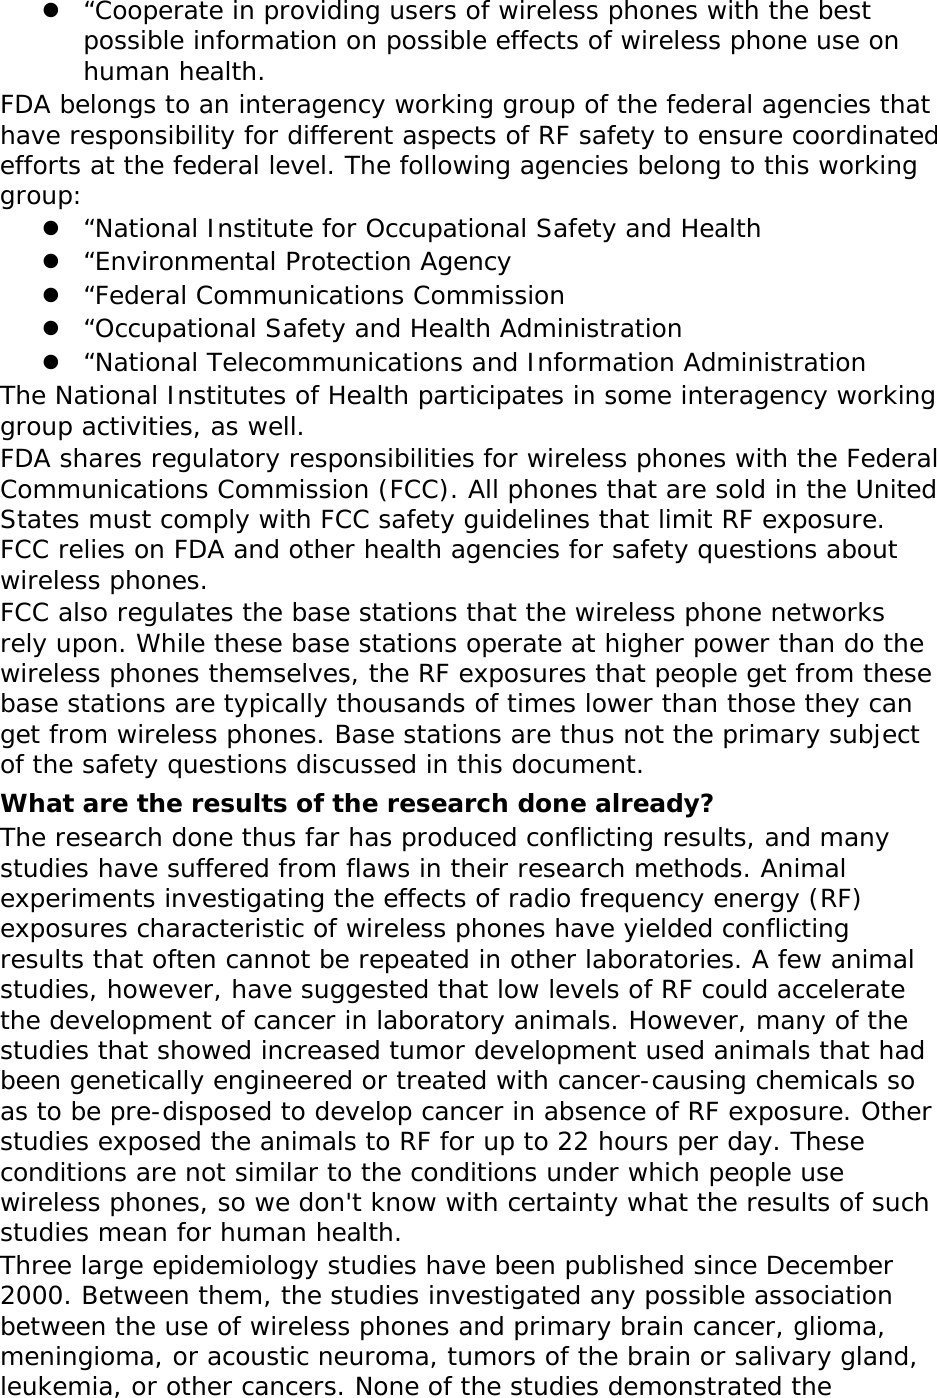 z “Cooperate in providing users of wireless phones with the best possible information on possible effects of wireless phone use on human health. FDA belongs to an interagency working group of the federal agencies that have responsibility for different aspects of RF safety to ensure coordinated efforts at the federal level. The following agencies belong to this working group: z “National Institute for Occupational Safety and Health z “Environmental Protection Agency z “Federal Communications Commission z “Occupational Safety and Health Administration z “National Telecommunications and Information Administration The National Institutes of Health participates in some interagency working group activities, as well. FDA shares regulatory responsibilities for wireless phones with the Federal Communications Commission (FCC). All phones that are sold in the United States must comply with FCC safety guidelines that limit RF exposure. FCC relies on FDA and other health agencies for safety questions about wireless phones. FCC also regulates the base stations that the wireless phone networks rely upon. While these base stations operate at higher power than do the wireless phones themselves, the RF exposures that people get from these base stations are typically thousands of times lower than those they can get from wireless phones. Base stations are thus not the primary subject of the safety questions discussed in this document. What are the results of the research done already? The research done thus far has produced conflicting results, and many studies have suffered from flaws in their research methods. Animal experiments investigating the effects of radio frequency energy (RF) exposures characteristic of wireless phones have yielded conflicting results that often cannot be repeated in other laboratories. A few animal studies, however, have suggested that low levels of RF could accelerate the development of cancer in laboratory animals. However, many of the studies that showed increased tumor development used animals that had been genetically engineered or treated with cancer-causing chemicals so as to be pre-disposed to develop cancer in absence of RF exposure. Other studies exposed the animals to RF for up to 22 hours per day. These conditions are not similar to the conditions under which people use wireless phones, so we don&apos;t know with certainty what the results of such studies mean for human health. Three large epidemiology studies have been published since December 2000. Between them, the studies investigated any possible association between the use of wireless phones and primary brain cancer, glioma, meningioma, or acoustic neuroma, tumors of the brain or salivary gland, leukemia, or other cancers. None of the studies demonstrated the 